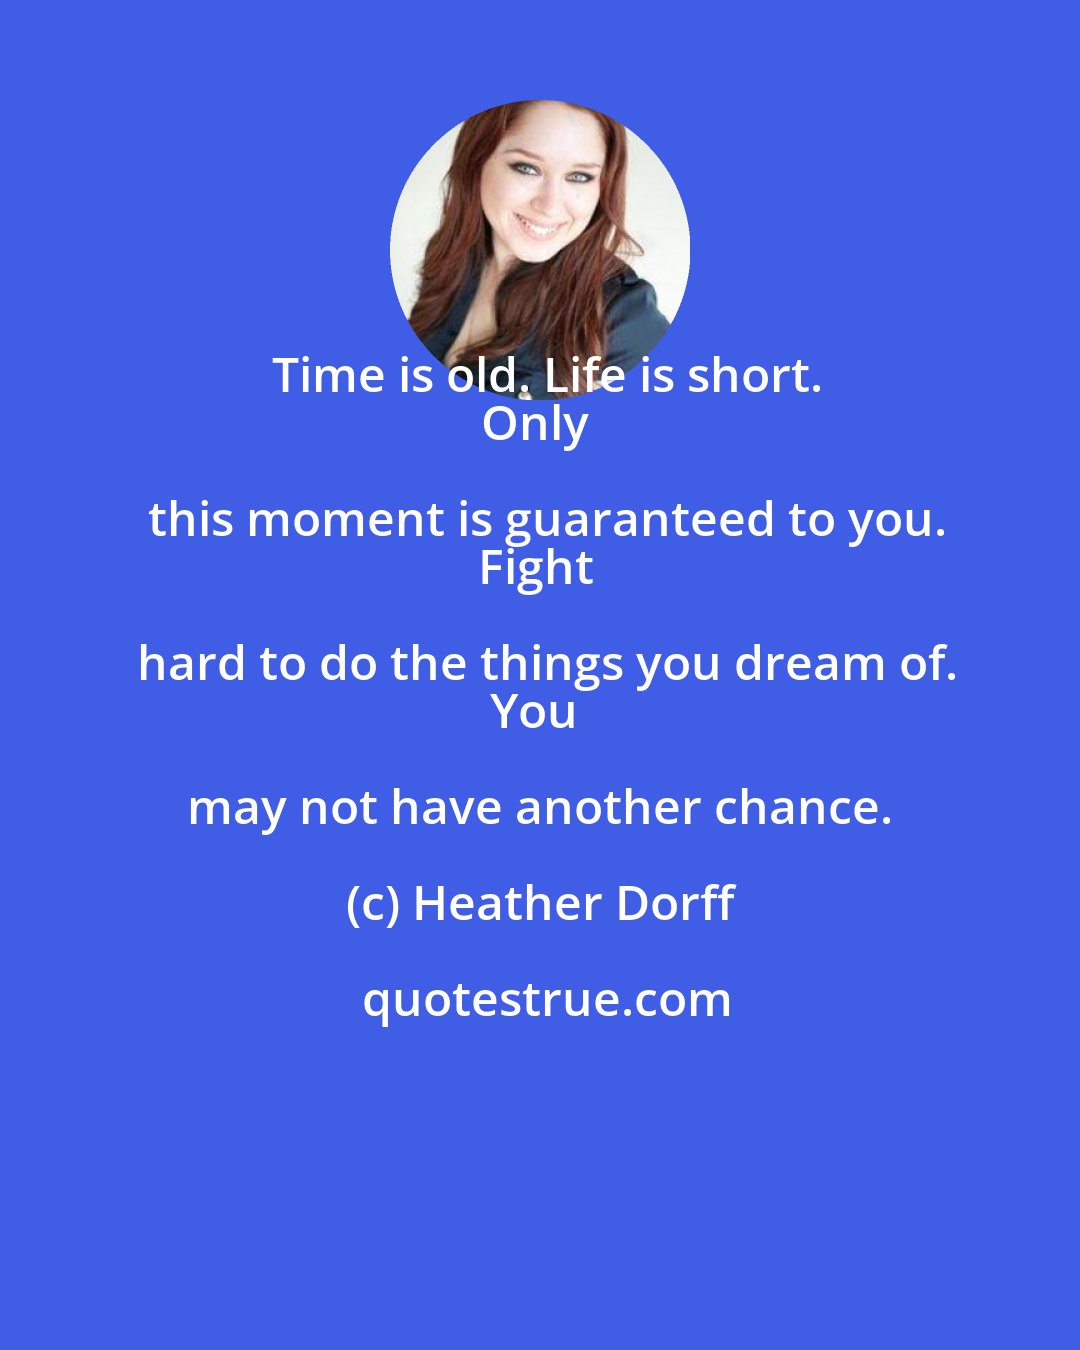 Heather Dorff: Time is old. Life is short.
Only this moment is guaranteed to you.
Fight hard to do the things you dream of.
You may not have another chance.